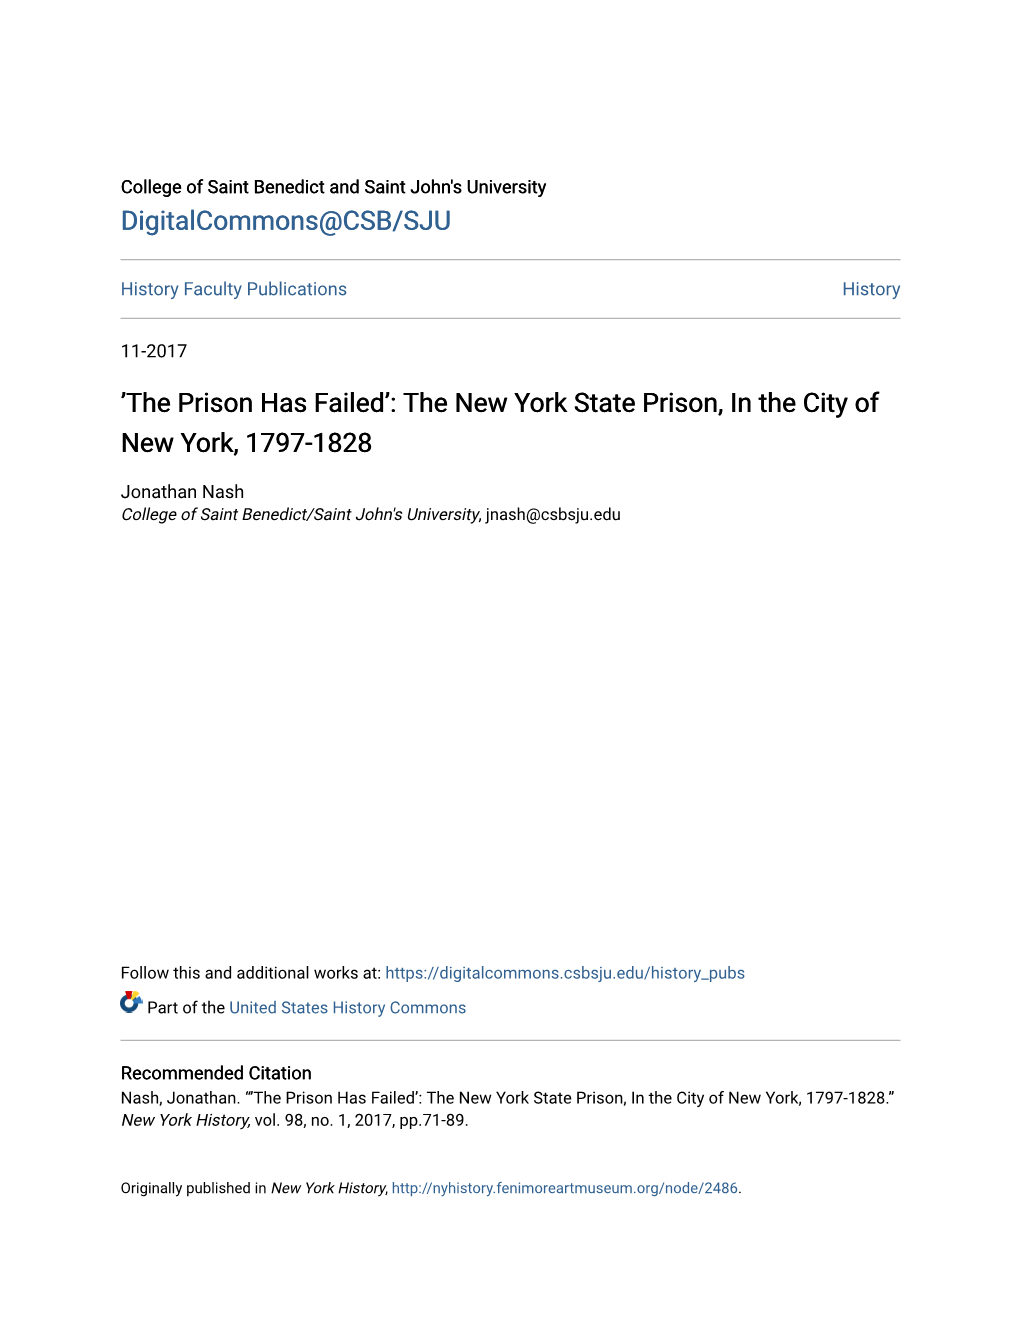 The New York State Prison, in the City of New York, 1797-1828